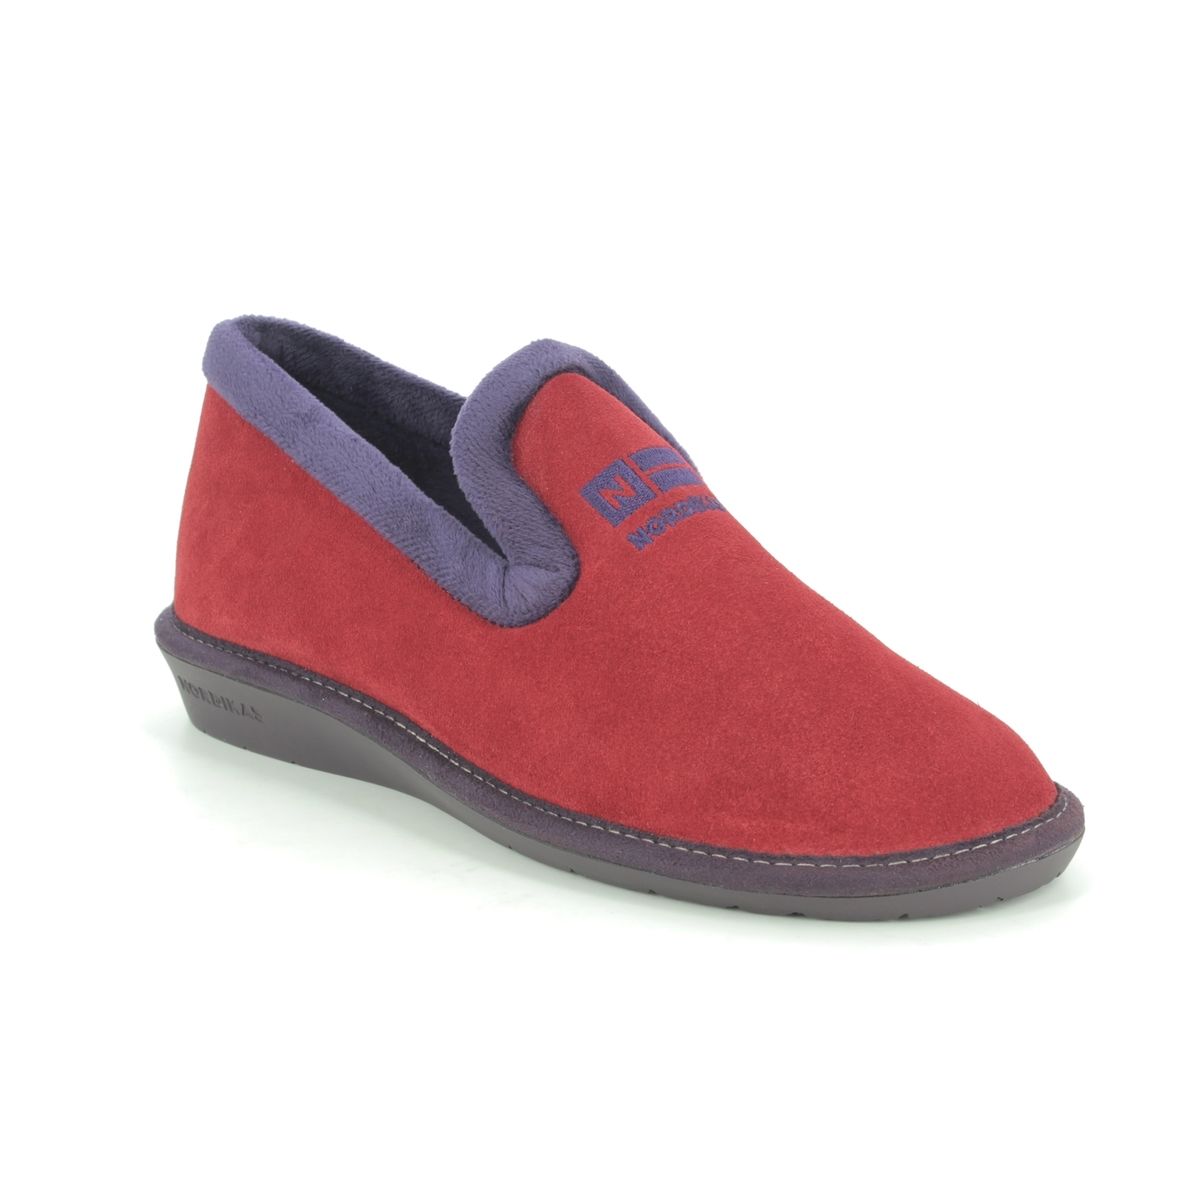 Nordikas Tabackin Red Suede Womens Slippers 305-4   Nicola 3 In Size 39 In Plain Red Suede